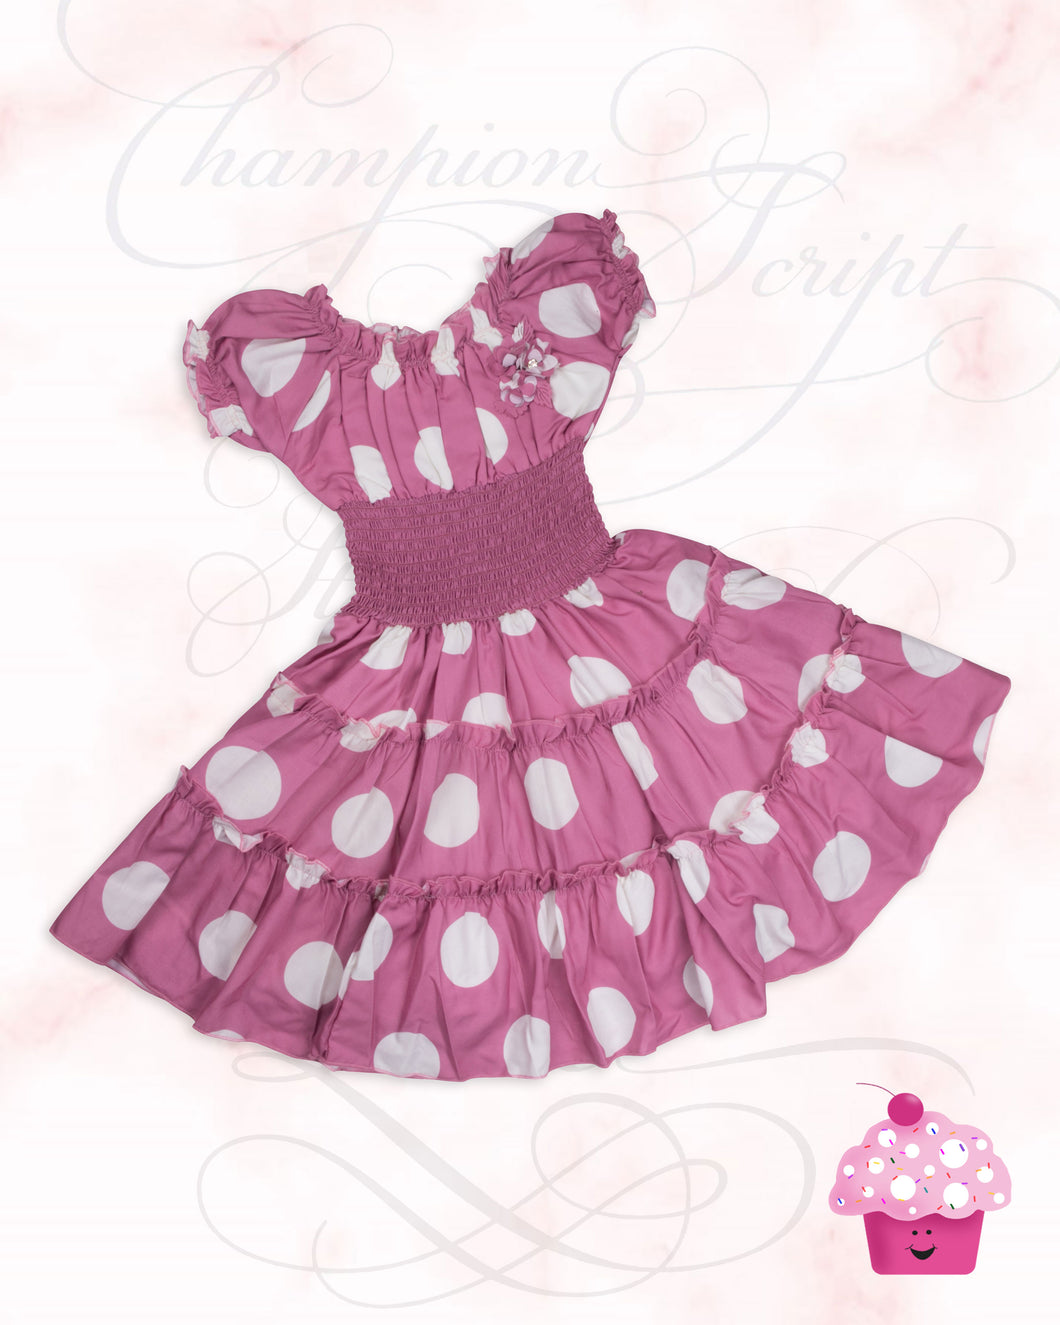 Girls Fashion Dotted Pink Frock